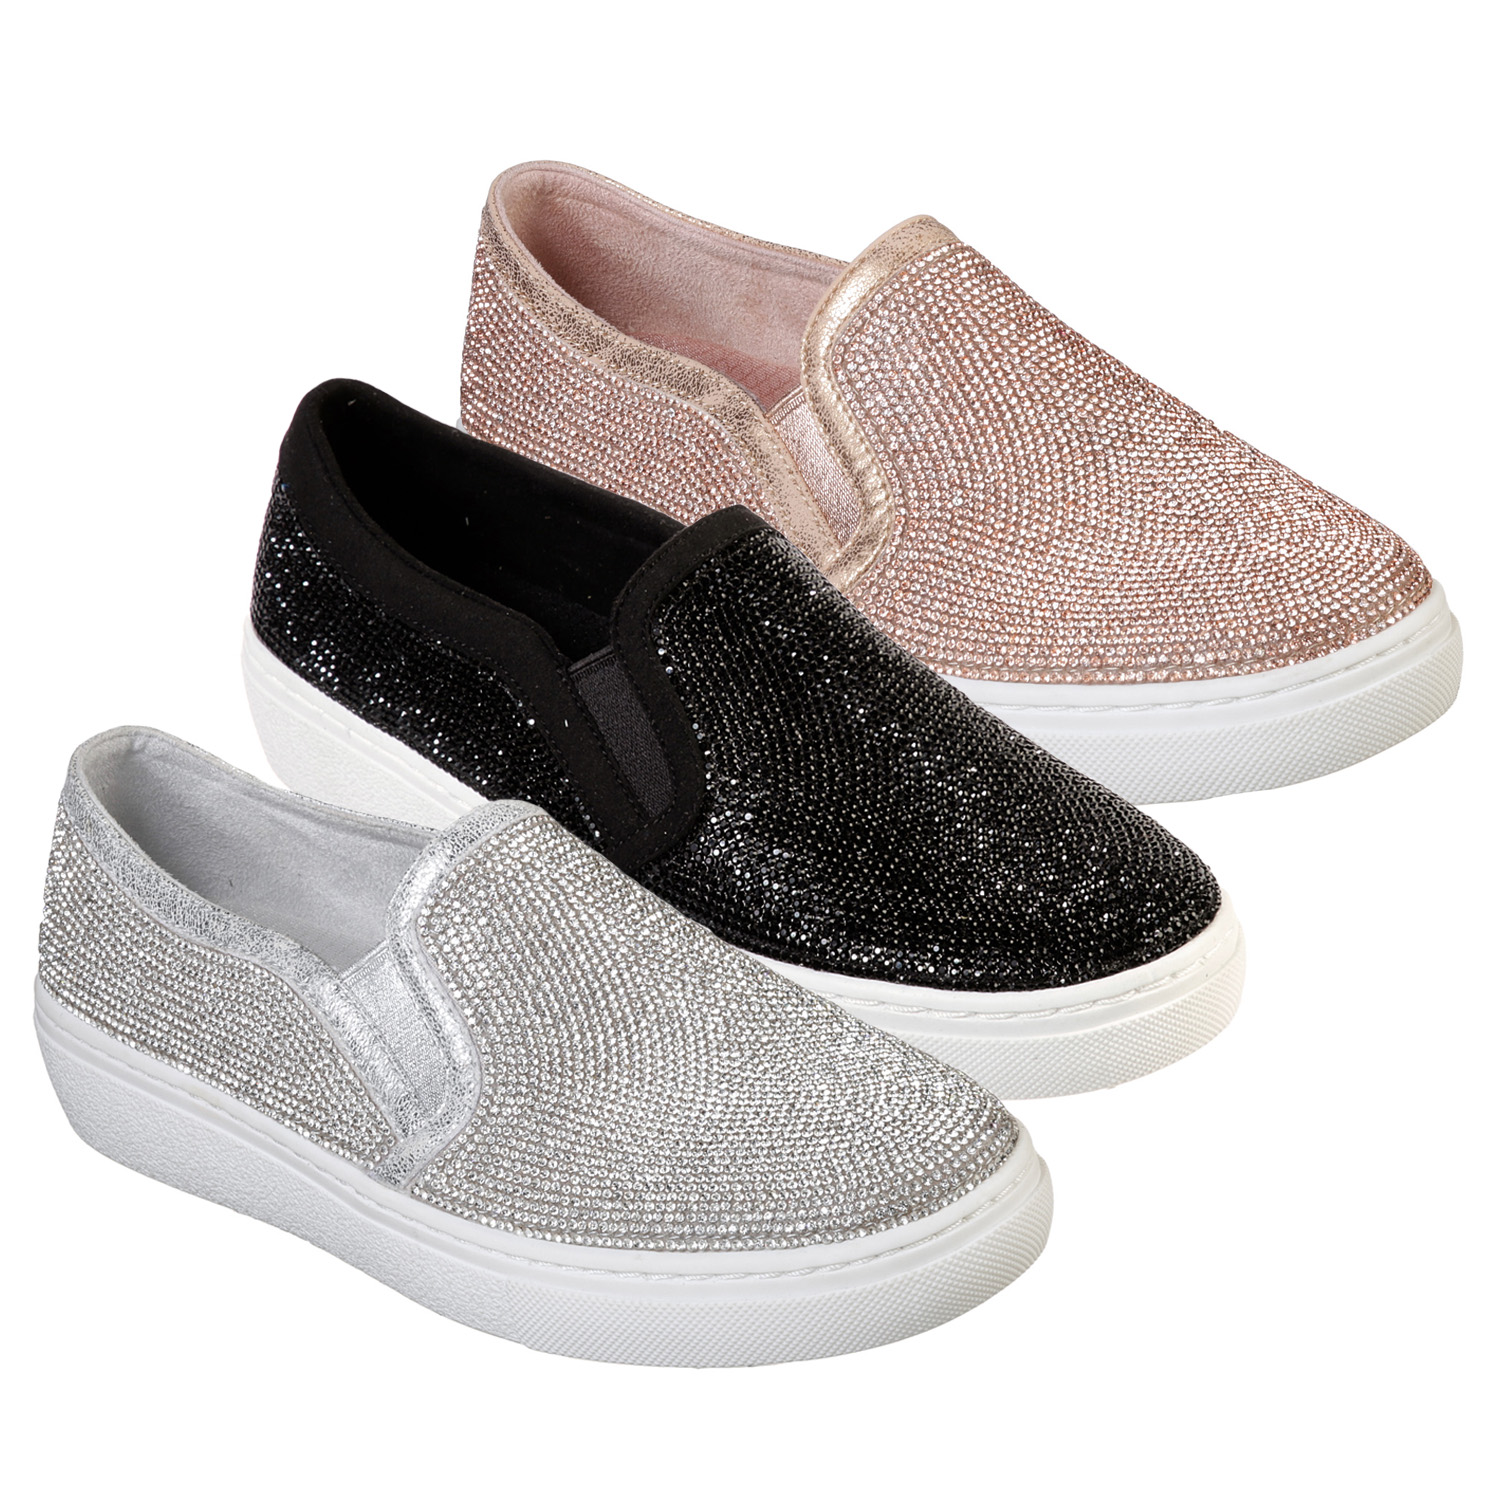 skechers glitter trainers Sale,up to 50 